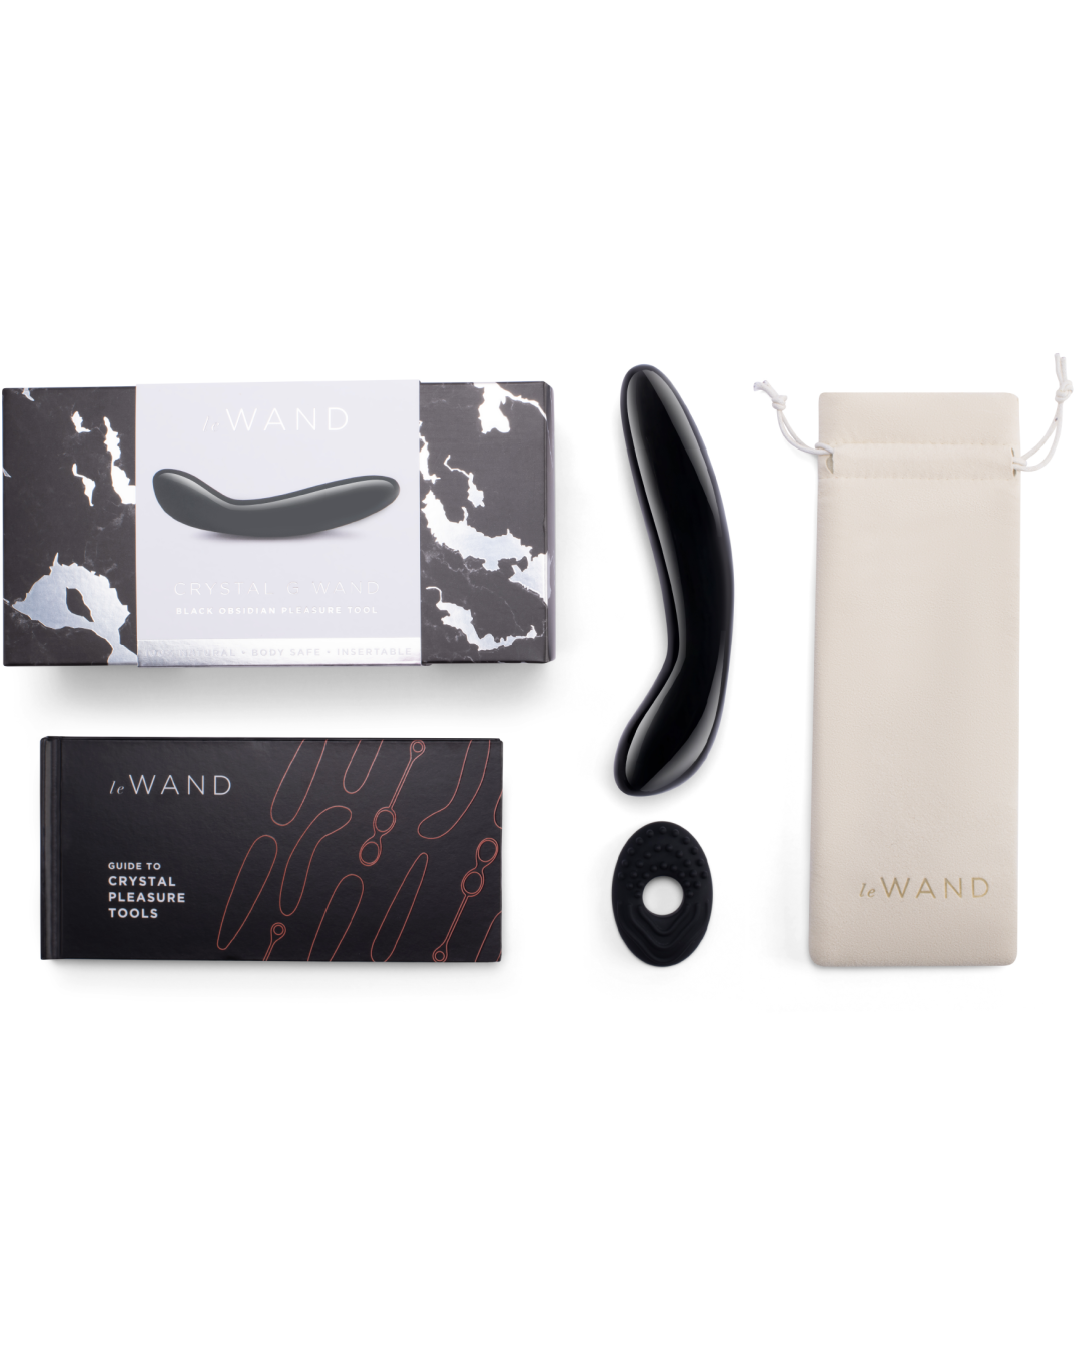 Le Wand Crystal G Spot Wand - Black Obsidian  pictured next to ring, box, storage pouch and manual 